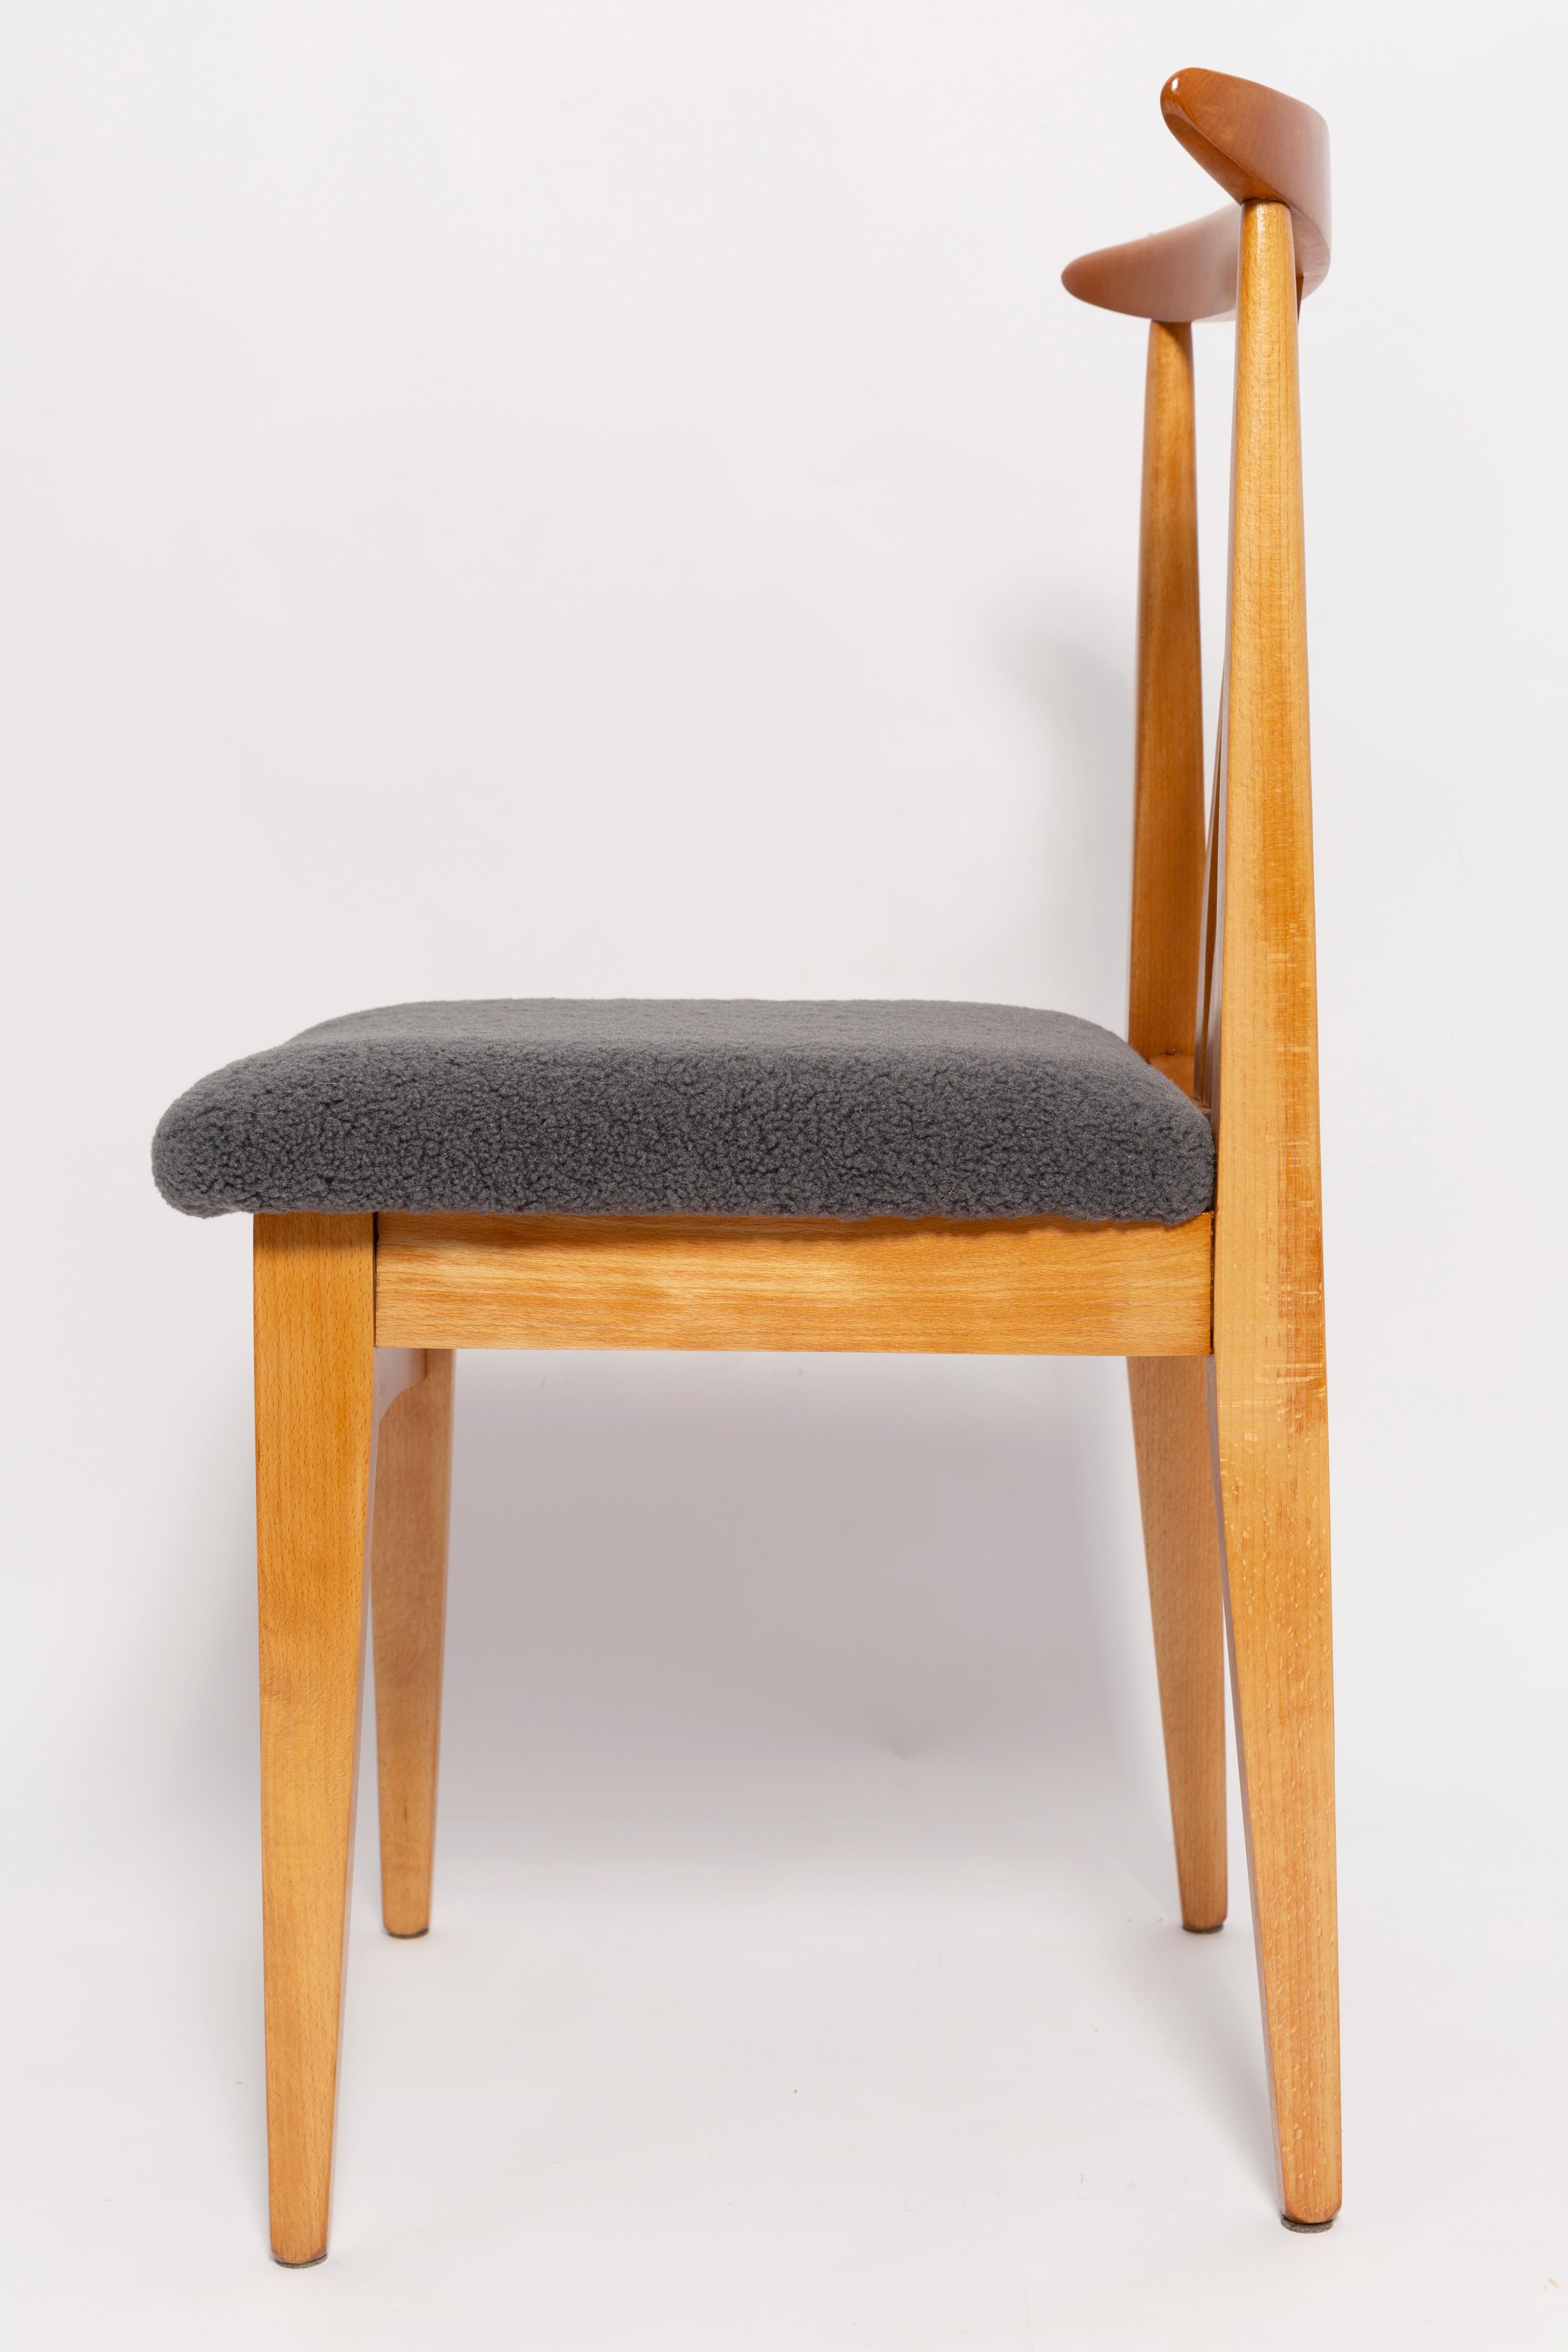 Hand-Crafted Mid-Century Graphite Gray Boucle Chair, Light Wood, M. Zielinski, Europe, 1960 For Sale